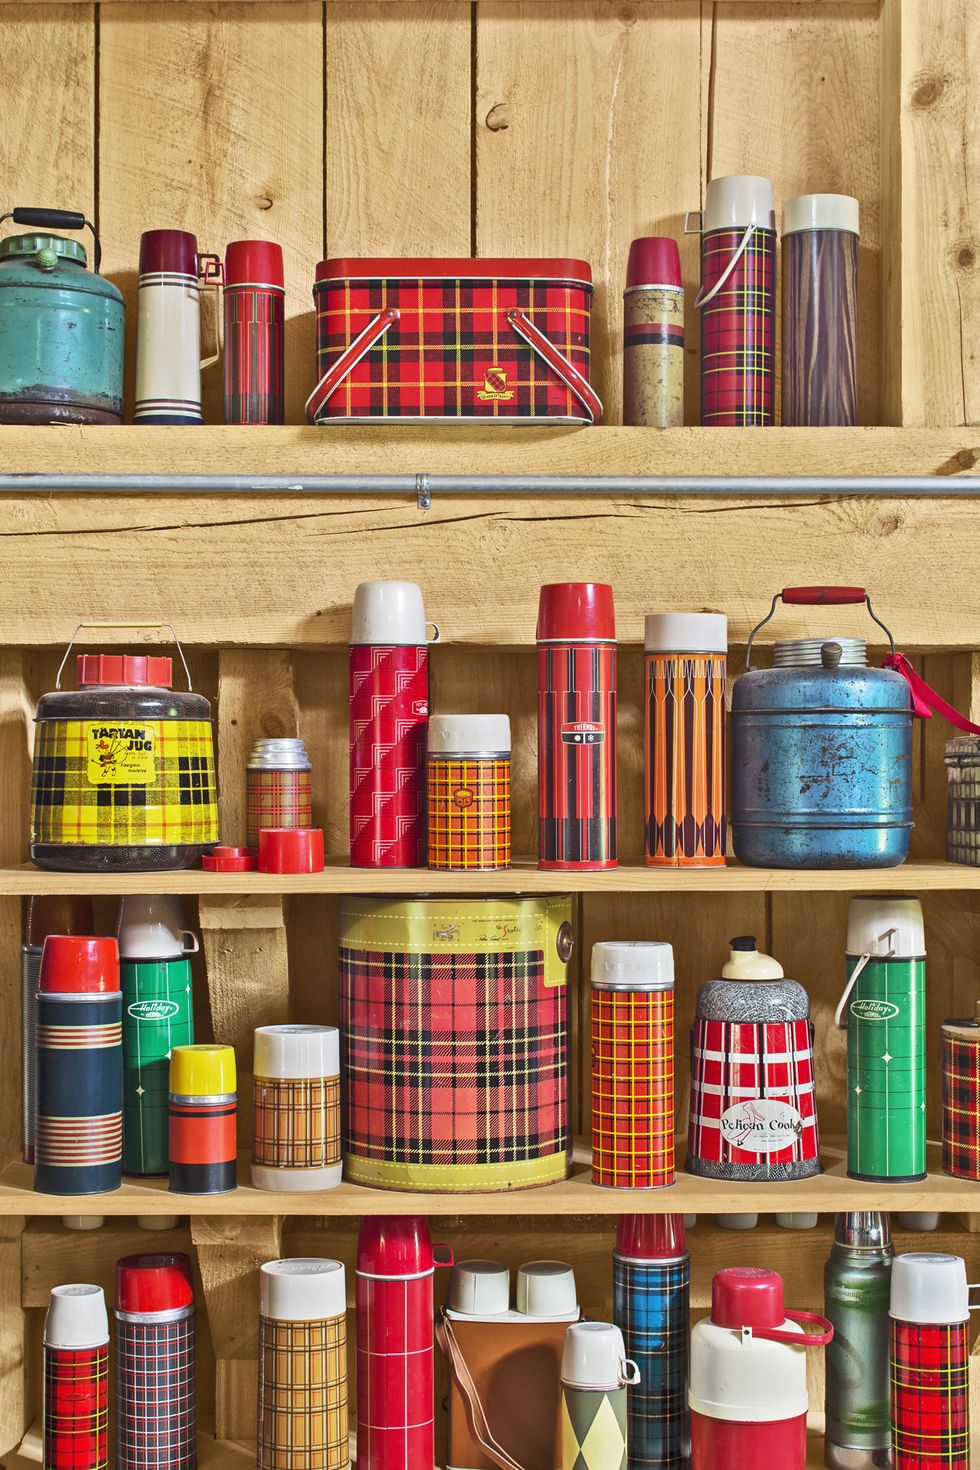 shelf, shelving, product, spice rack, food storage containers, pantry, furniture, canning, mason jar, pattern,